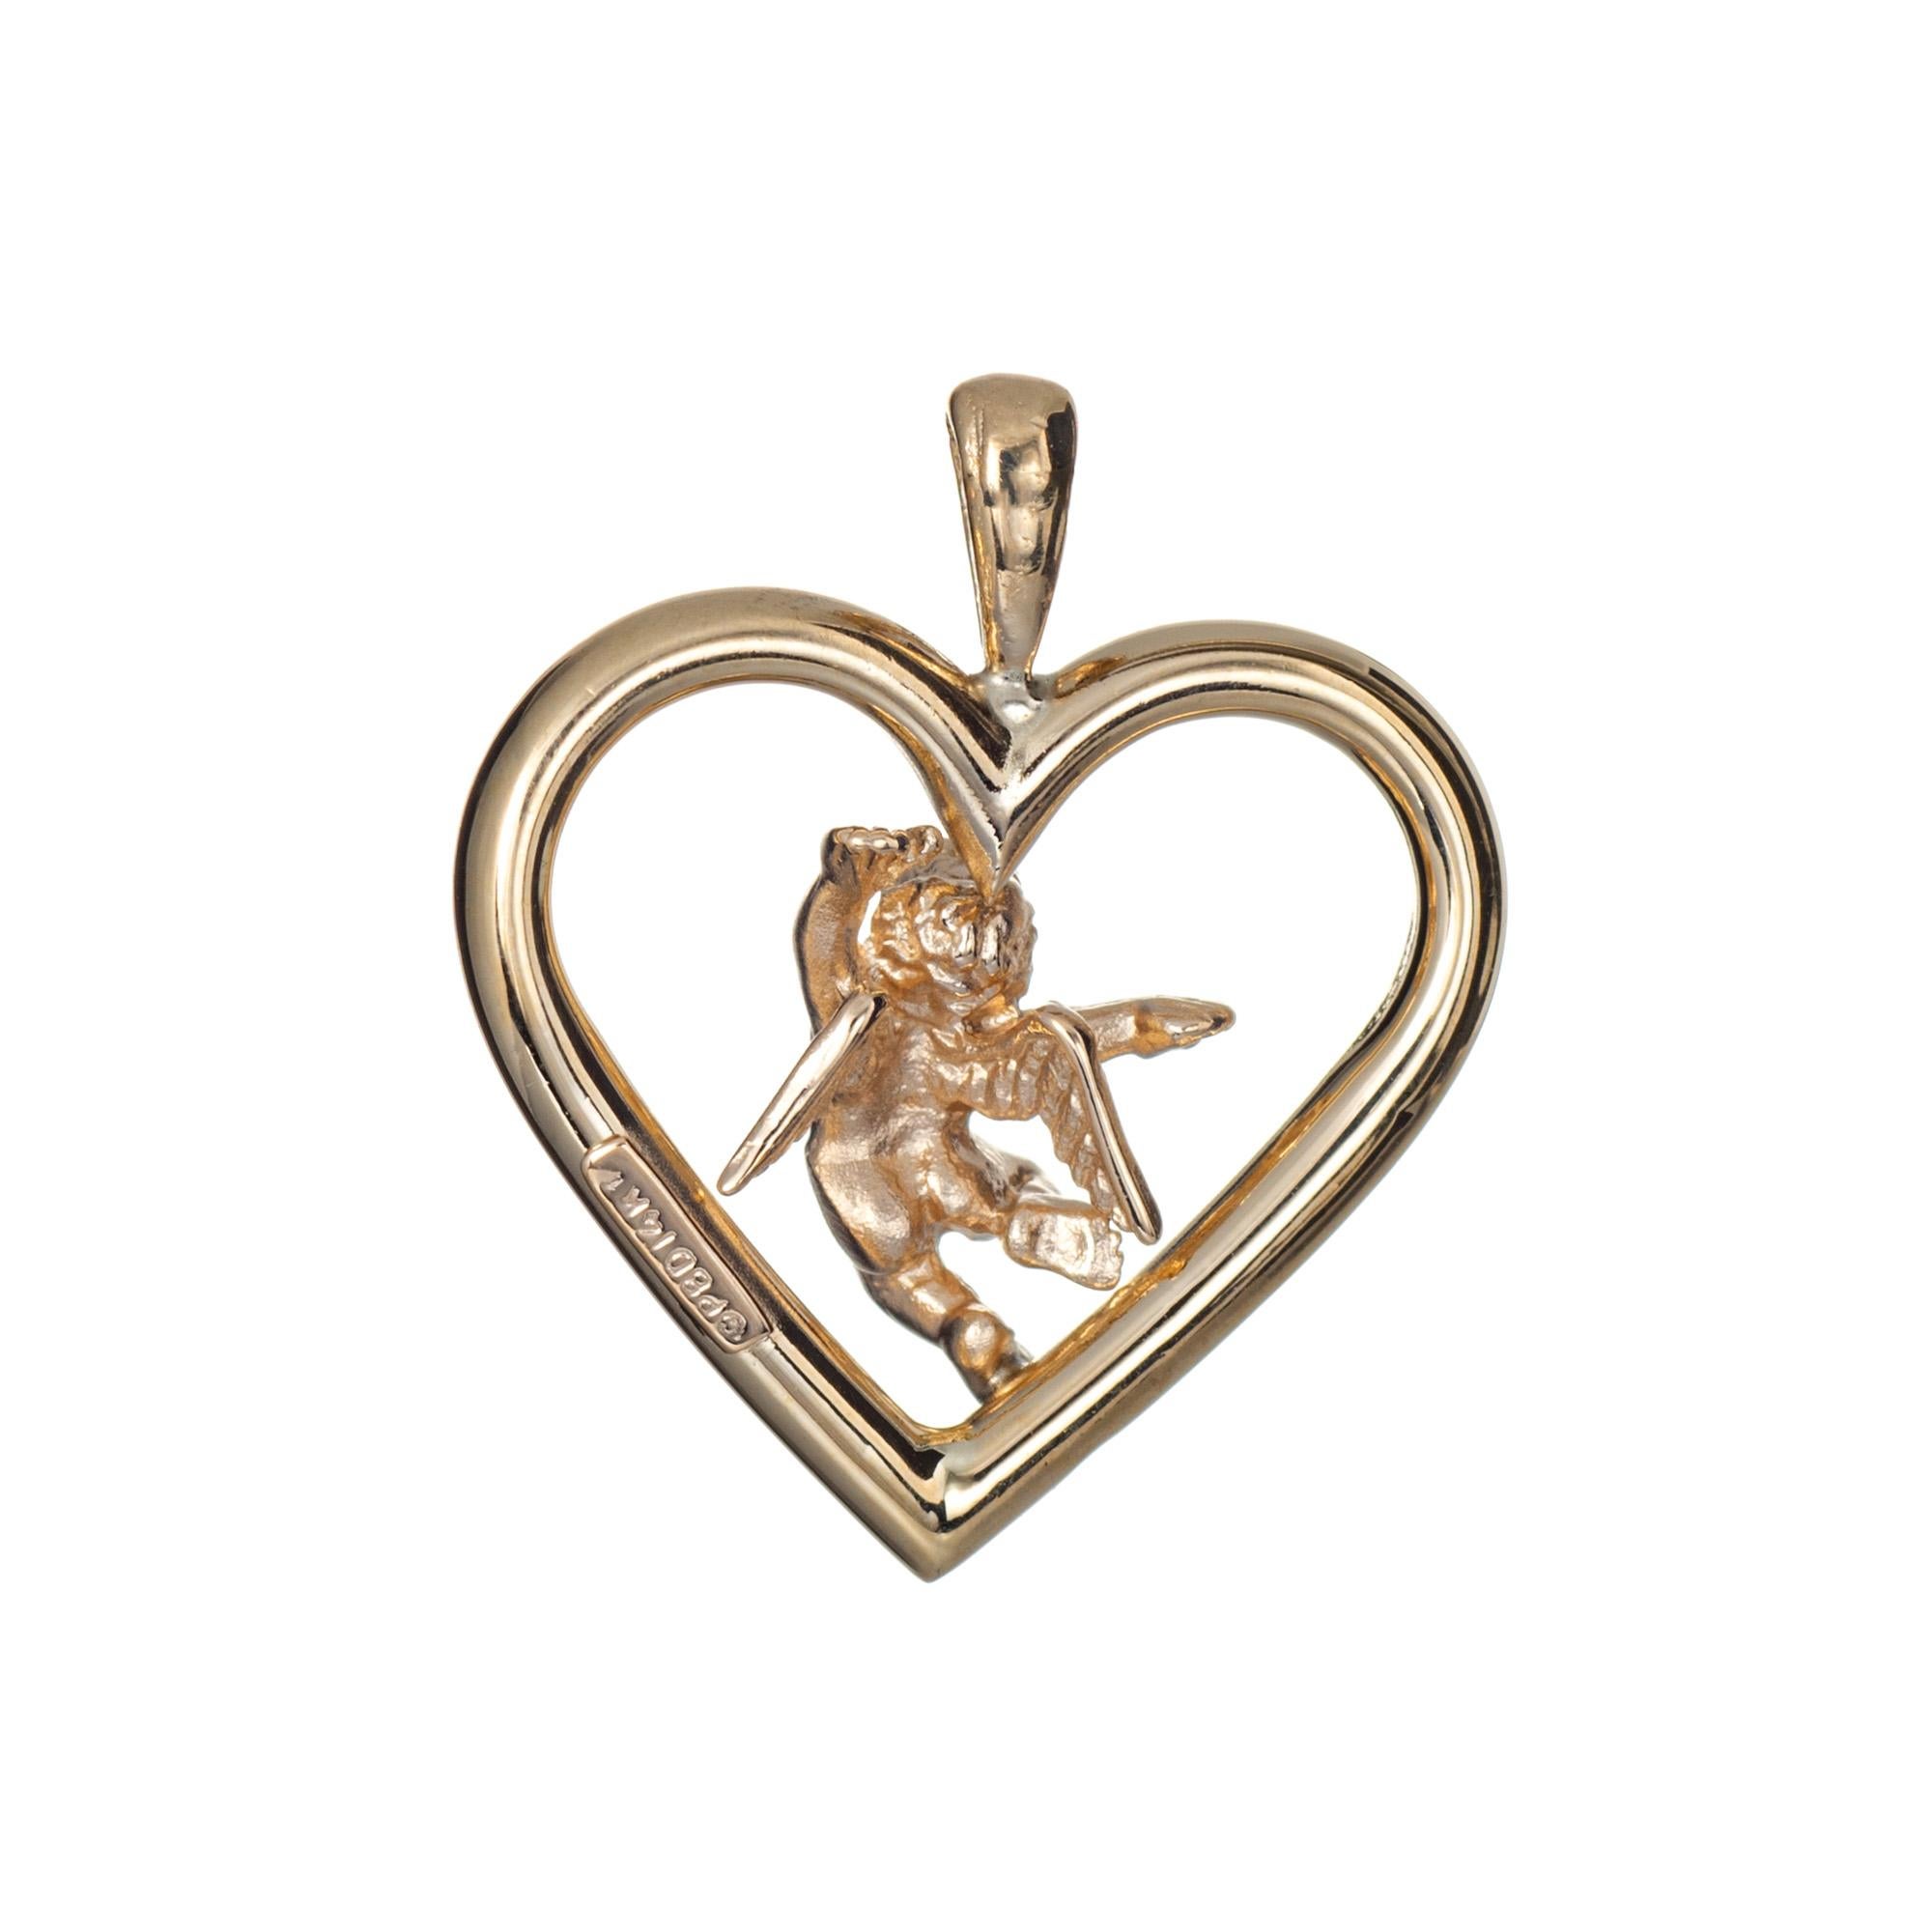 Finely detailed cupid angel heart pendant (or charm) crafted in 14k yellow gold.  

The nicely detailed pendant is small to medium in scale and features a winged cupid angel. The piece can be worn on a chain or as a charm on a bracelet. 

The